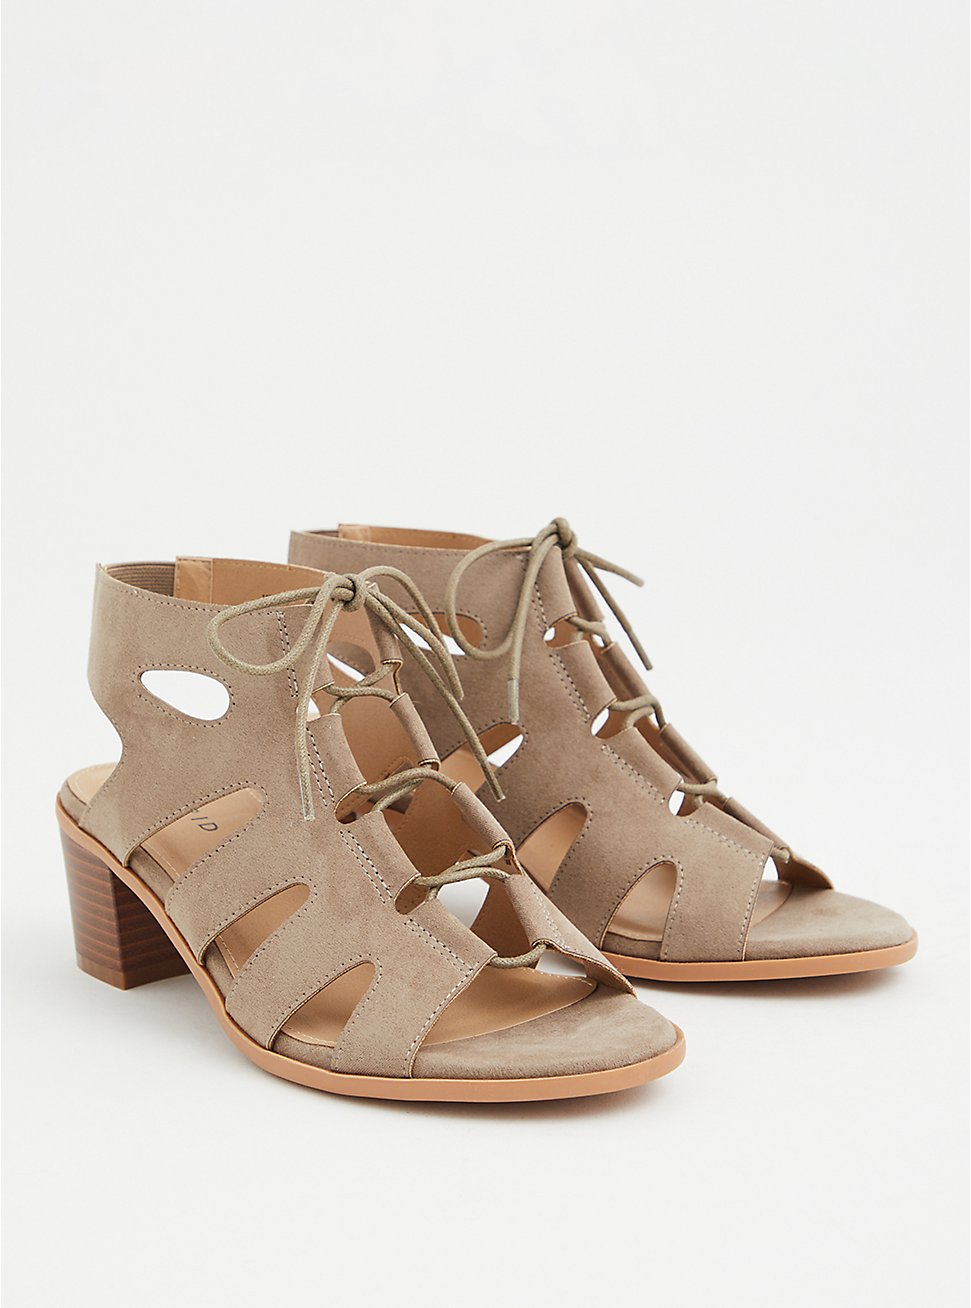 Taupe Faux Suede Lace Up Block Heel (WW), TAUPE, hi-res